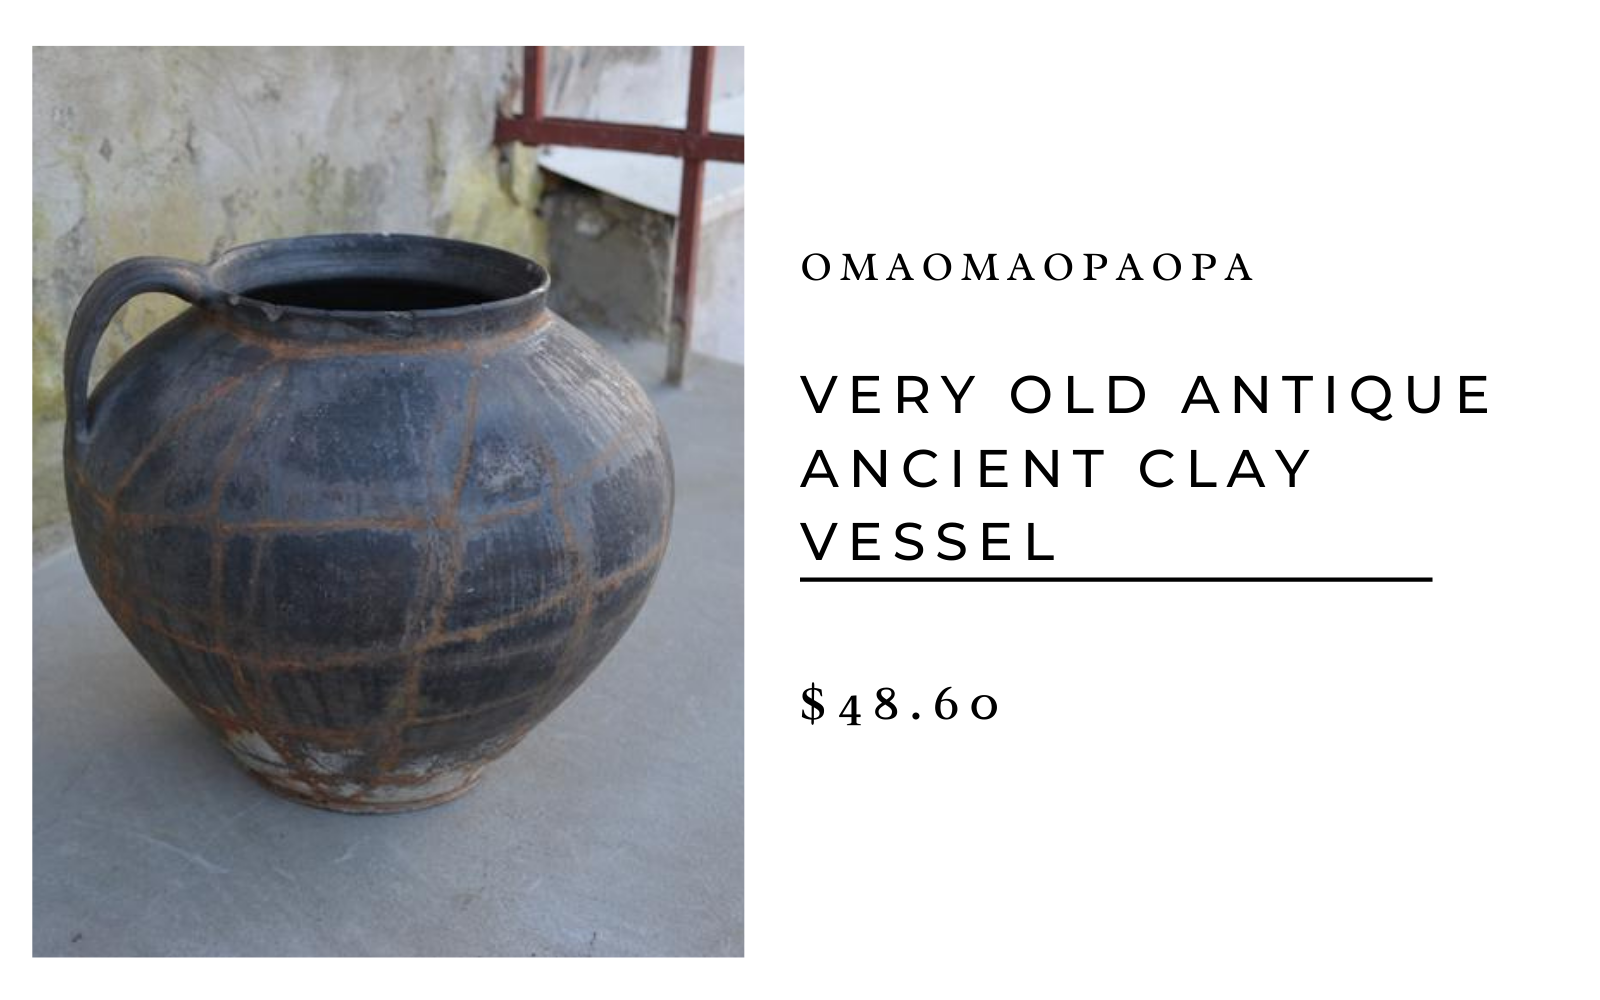 OmaOmaOpaOpa Very Old Antique Ancient Clay Vessel